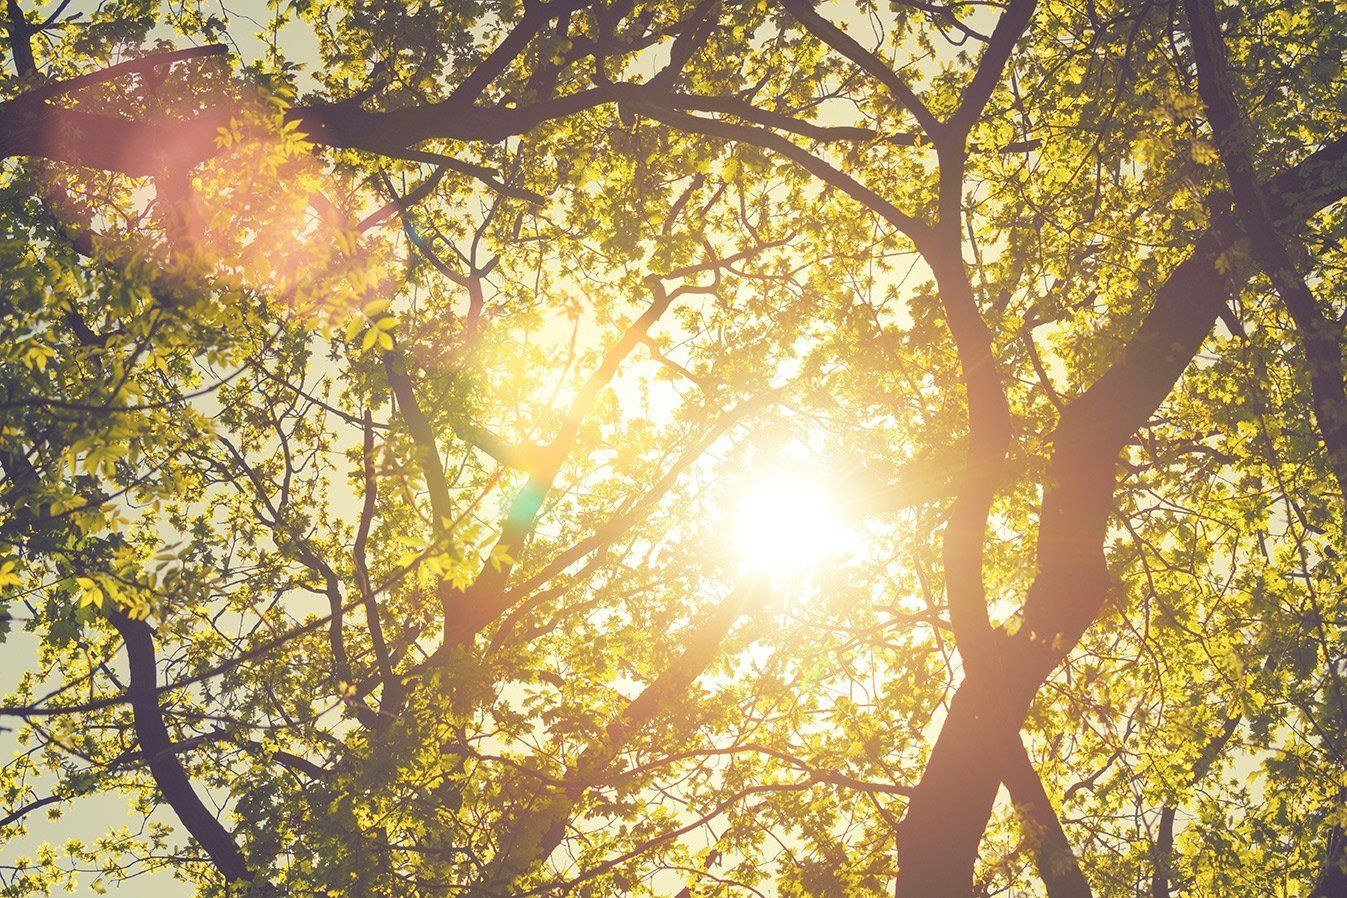 The sun is shining through the branches of a tree.